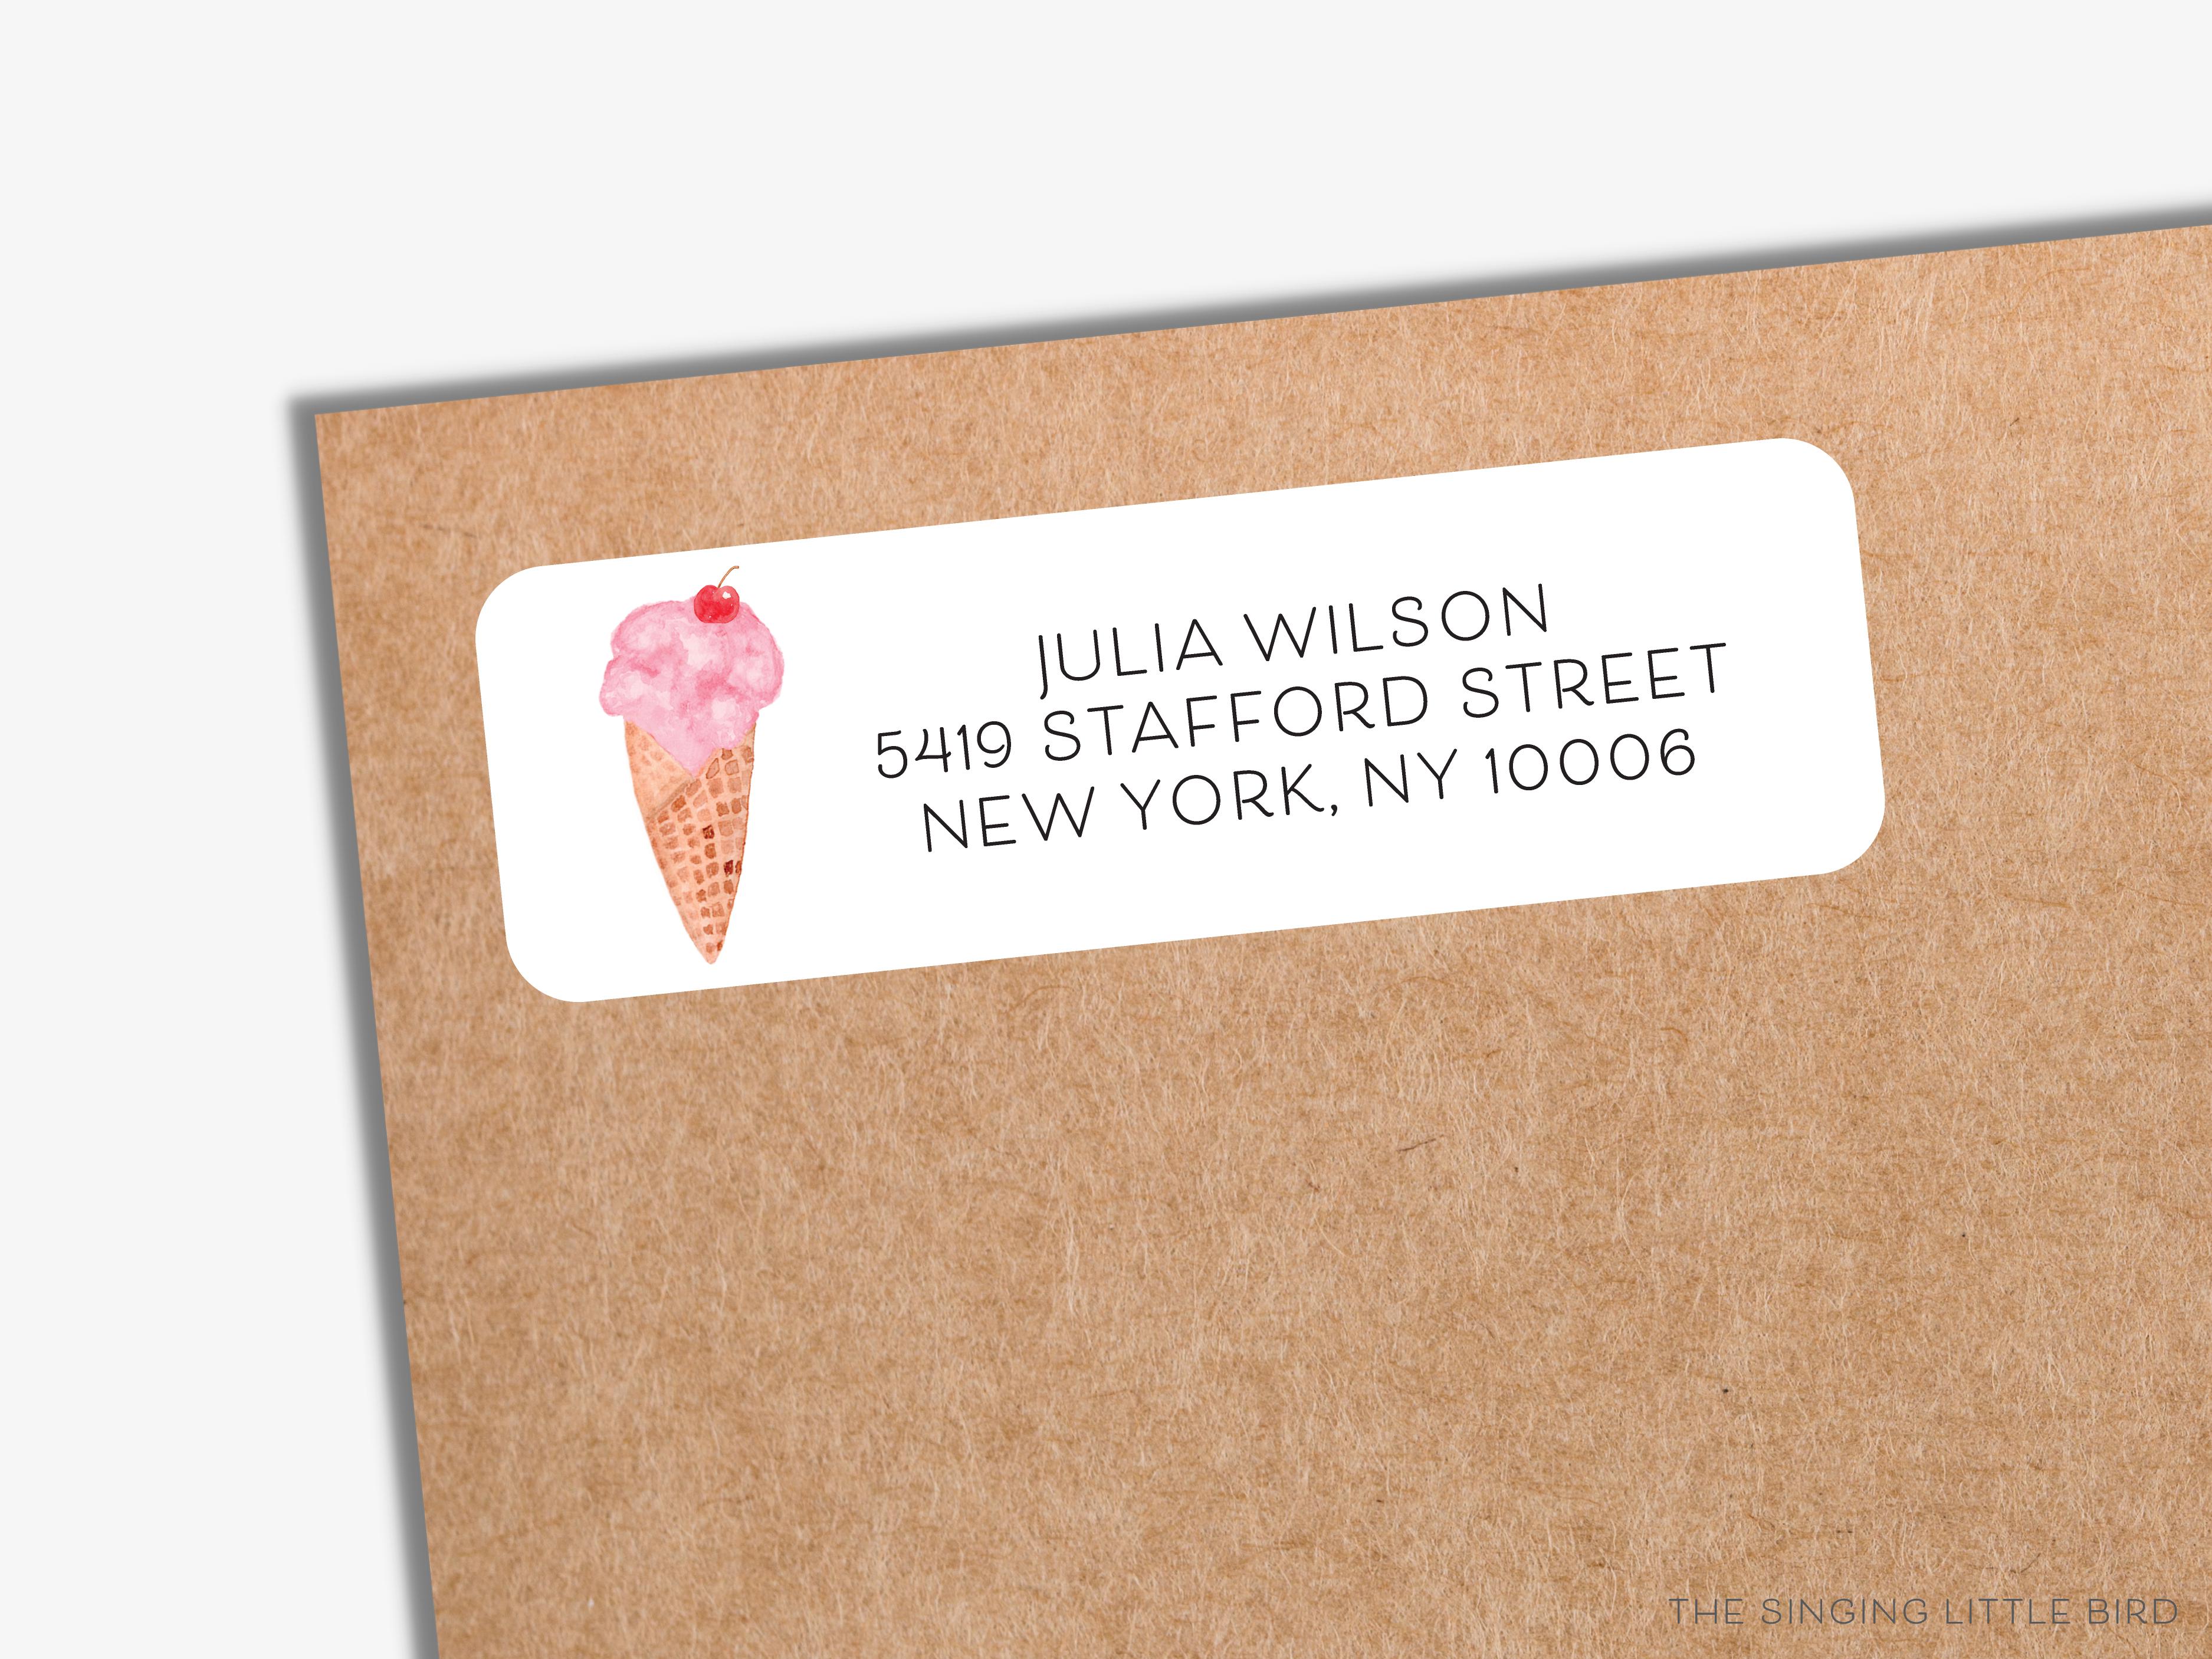 Ice Cream Cone Return Address Labels- These personalized return address labels are 2.625" x 1" and feature our hand-painted watercolor ice cream cone, printed in the USA on beautiful matte finish labels. These make great gifts for yourself or the sweet tooth lover. -The Singing Little Bird